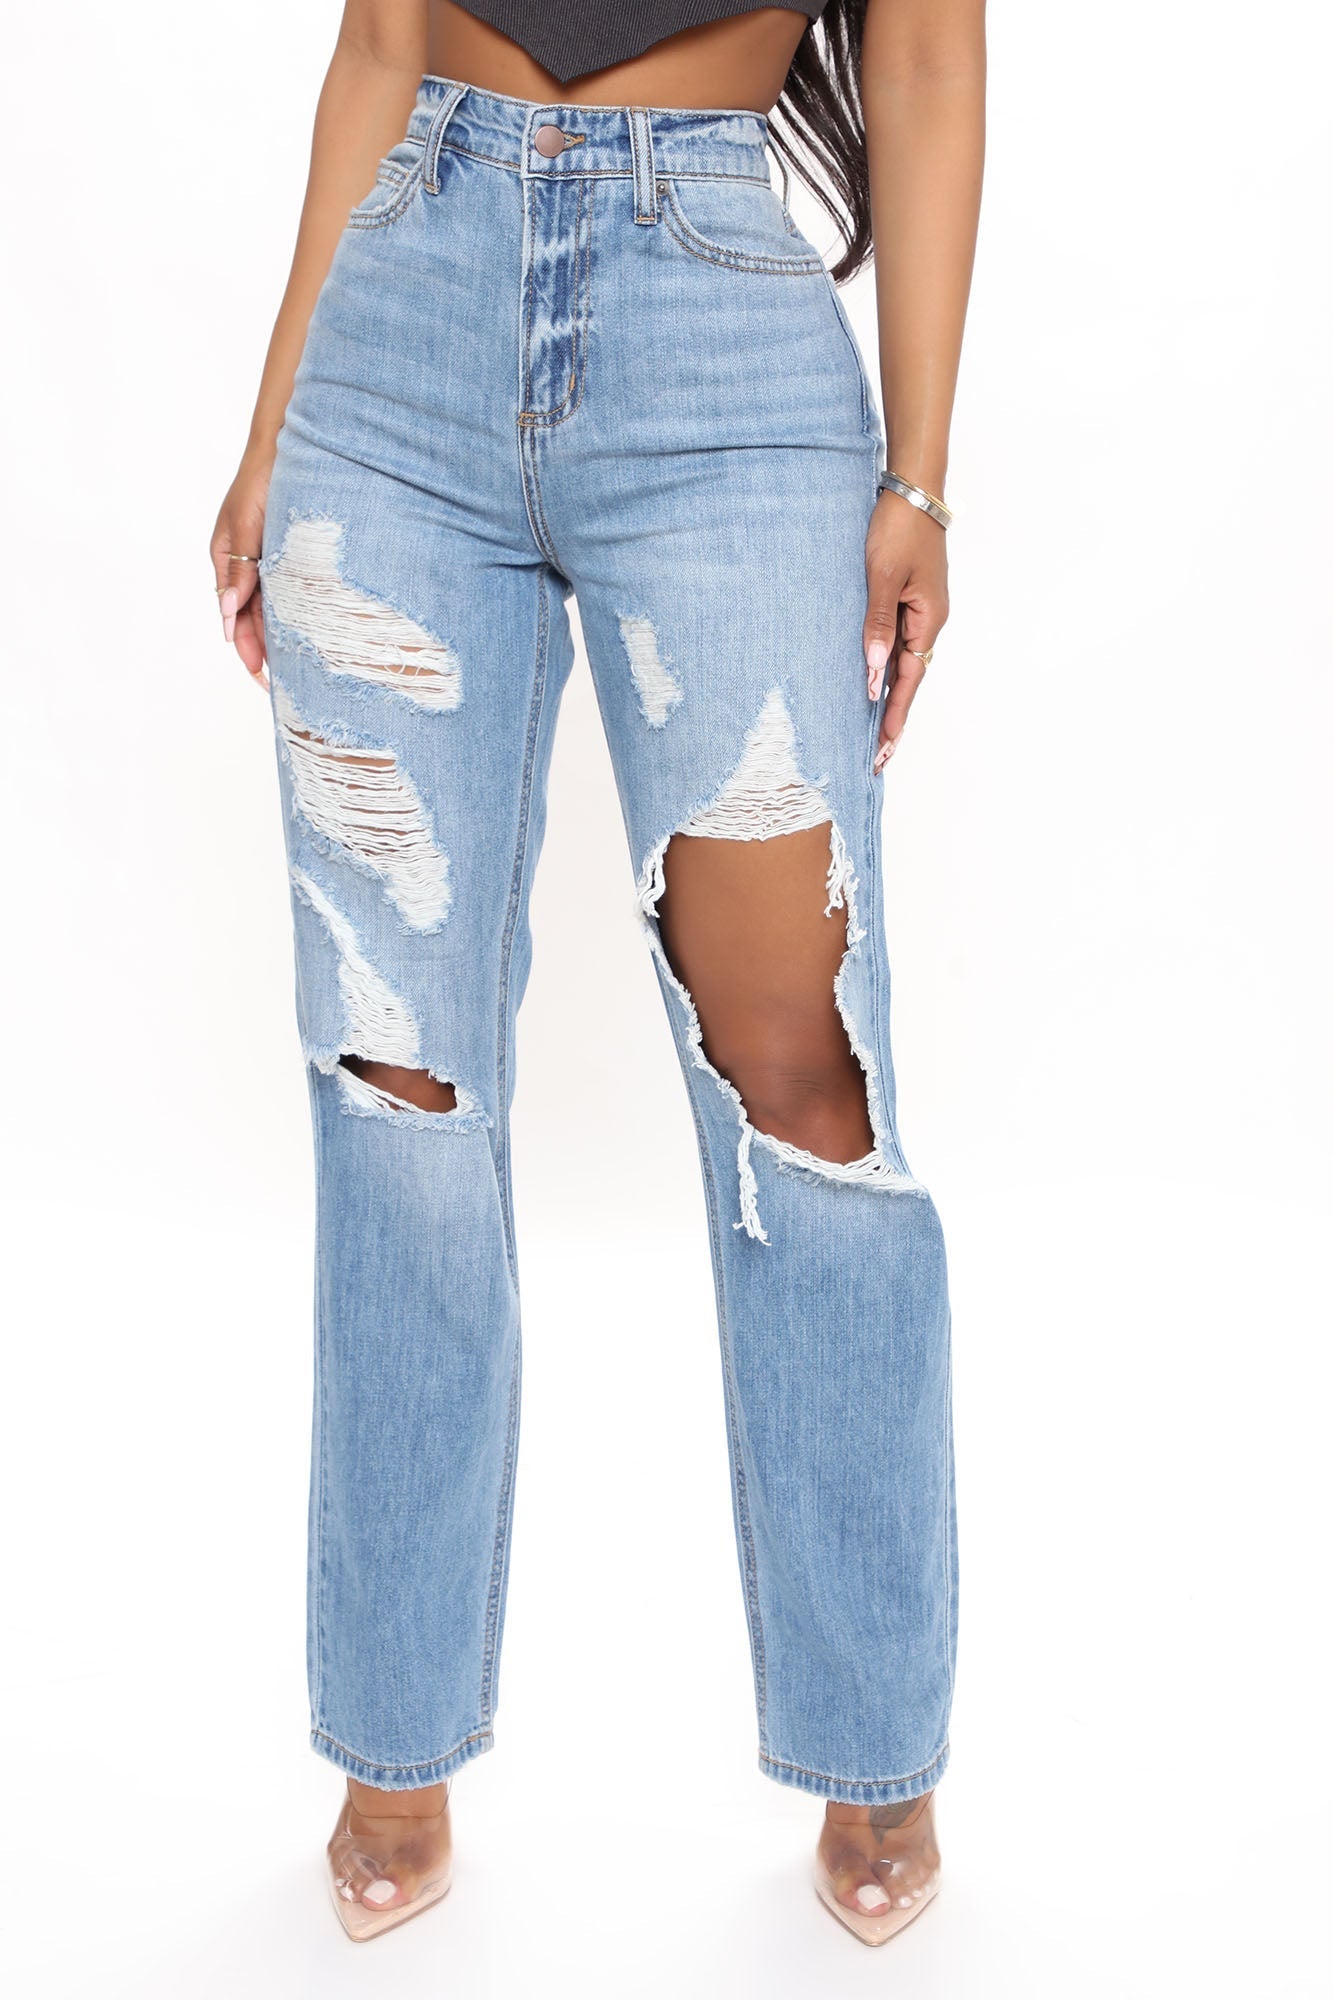 Can't Tell You Non Stretch Destroyed Jeans - Medium Blue Wash